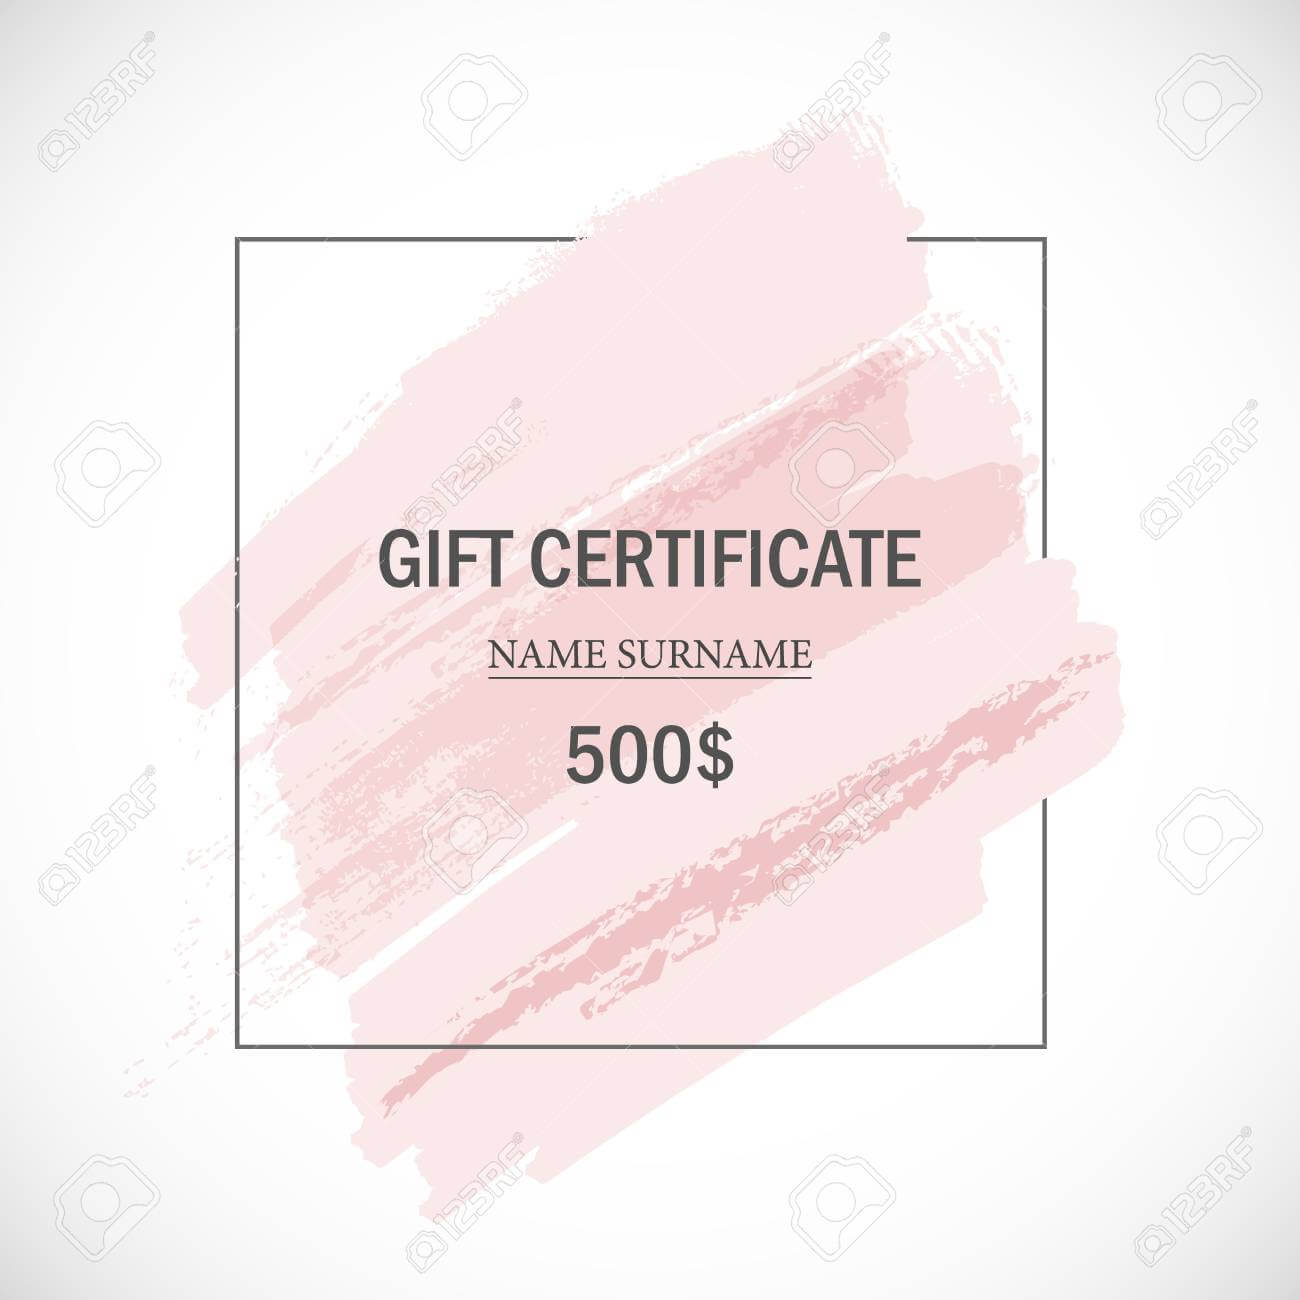 Pink Gift Certificate Template. Inside Pink Gift Certificate Template